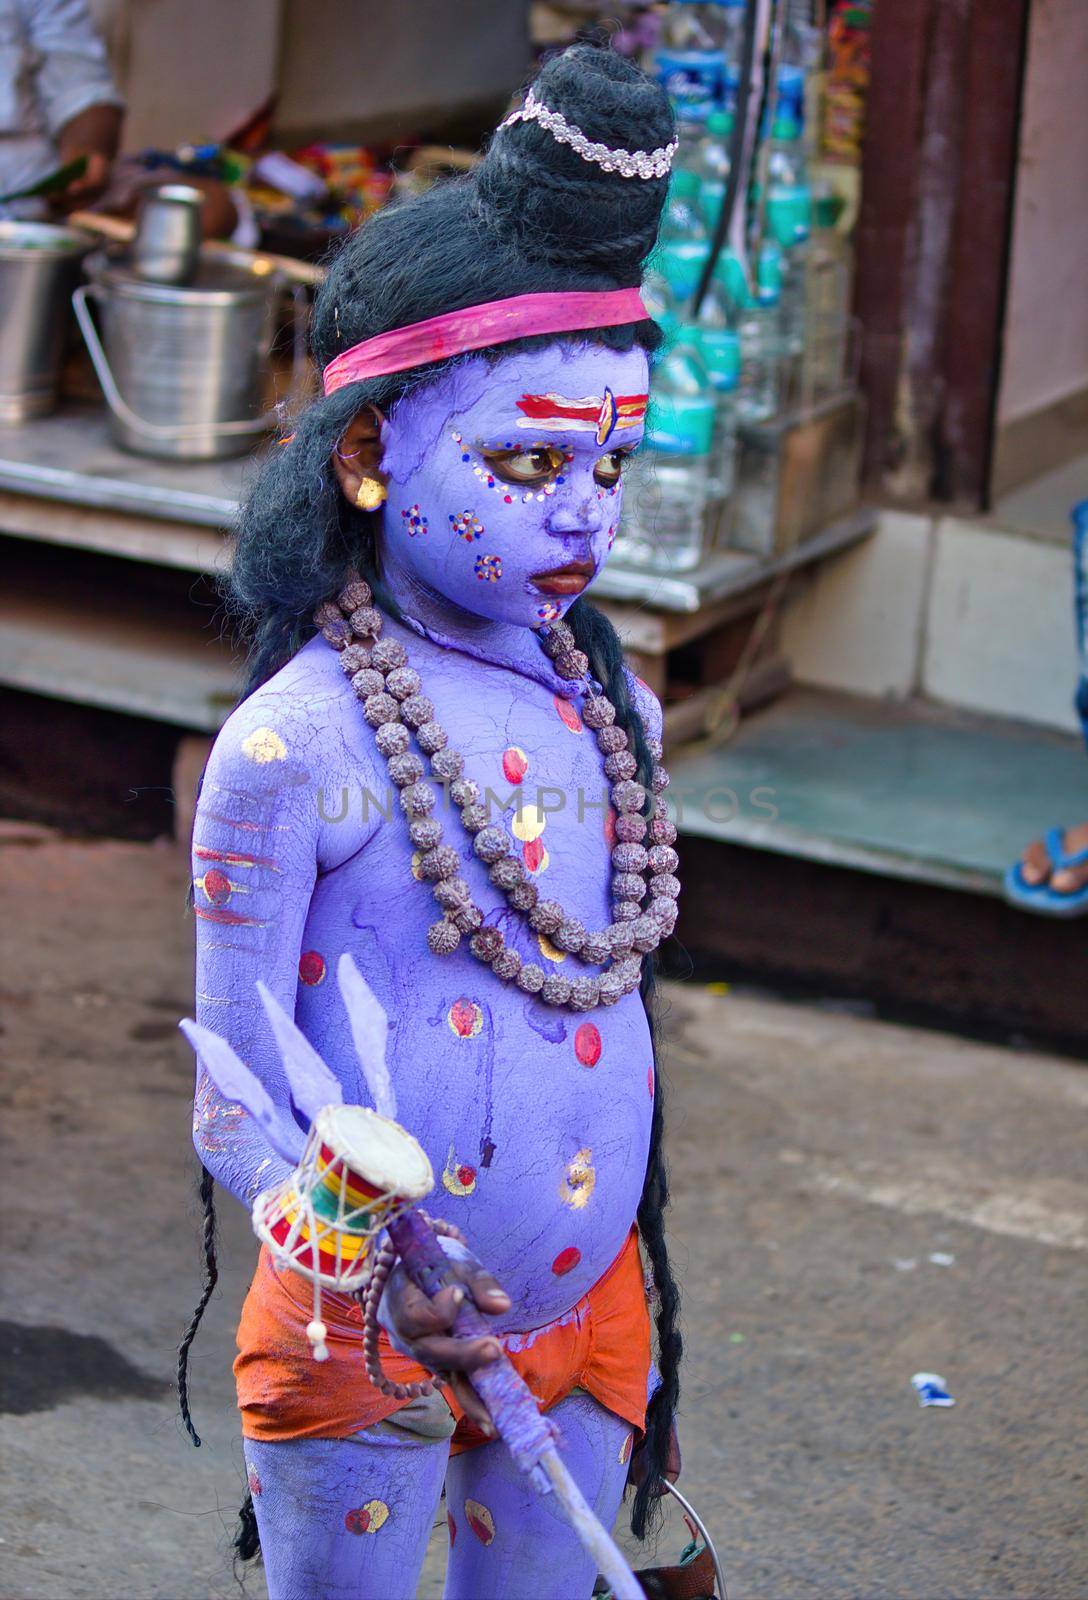 Pushkar, India - NOVEMBER 10, 2016: An unidentified boy dressed and disguised as hindu Lord Shiva with blue paint attends the Pushkar cattle fair in the state of Rajasthan